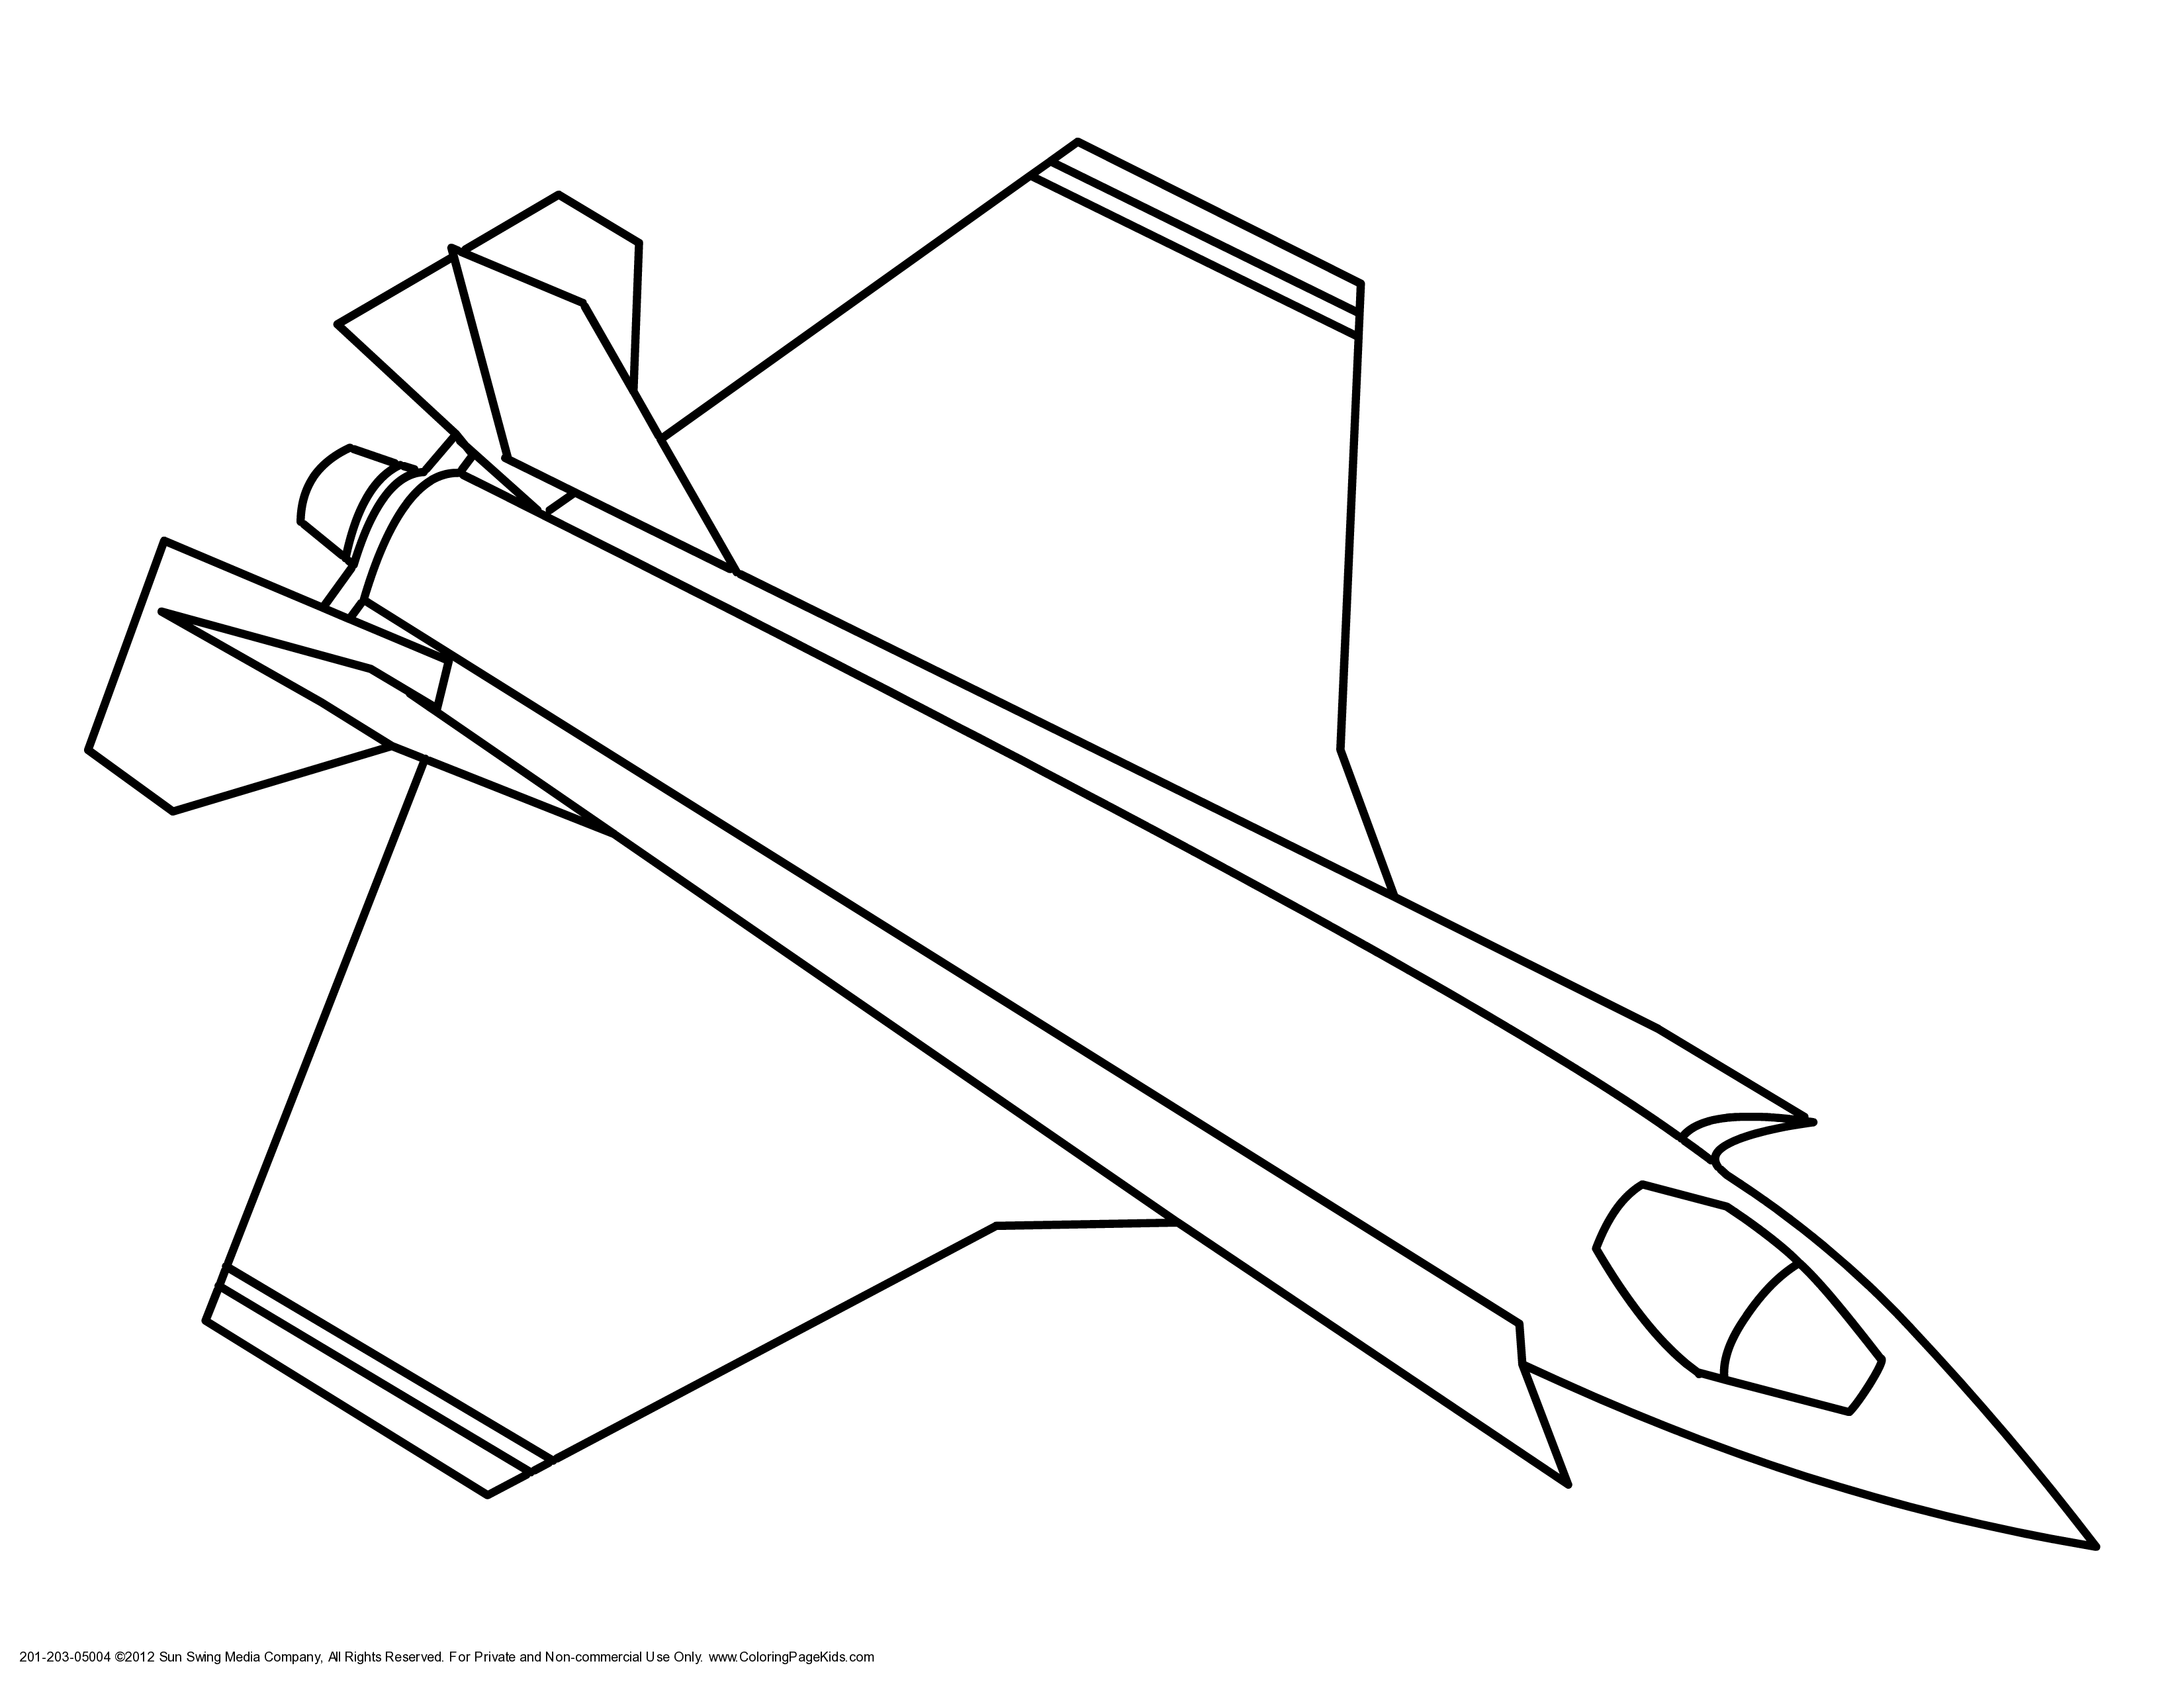 Jet airplane coloring pages airplanes airplane tickets airline airplanes coloring book